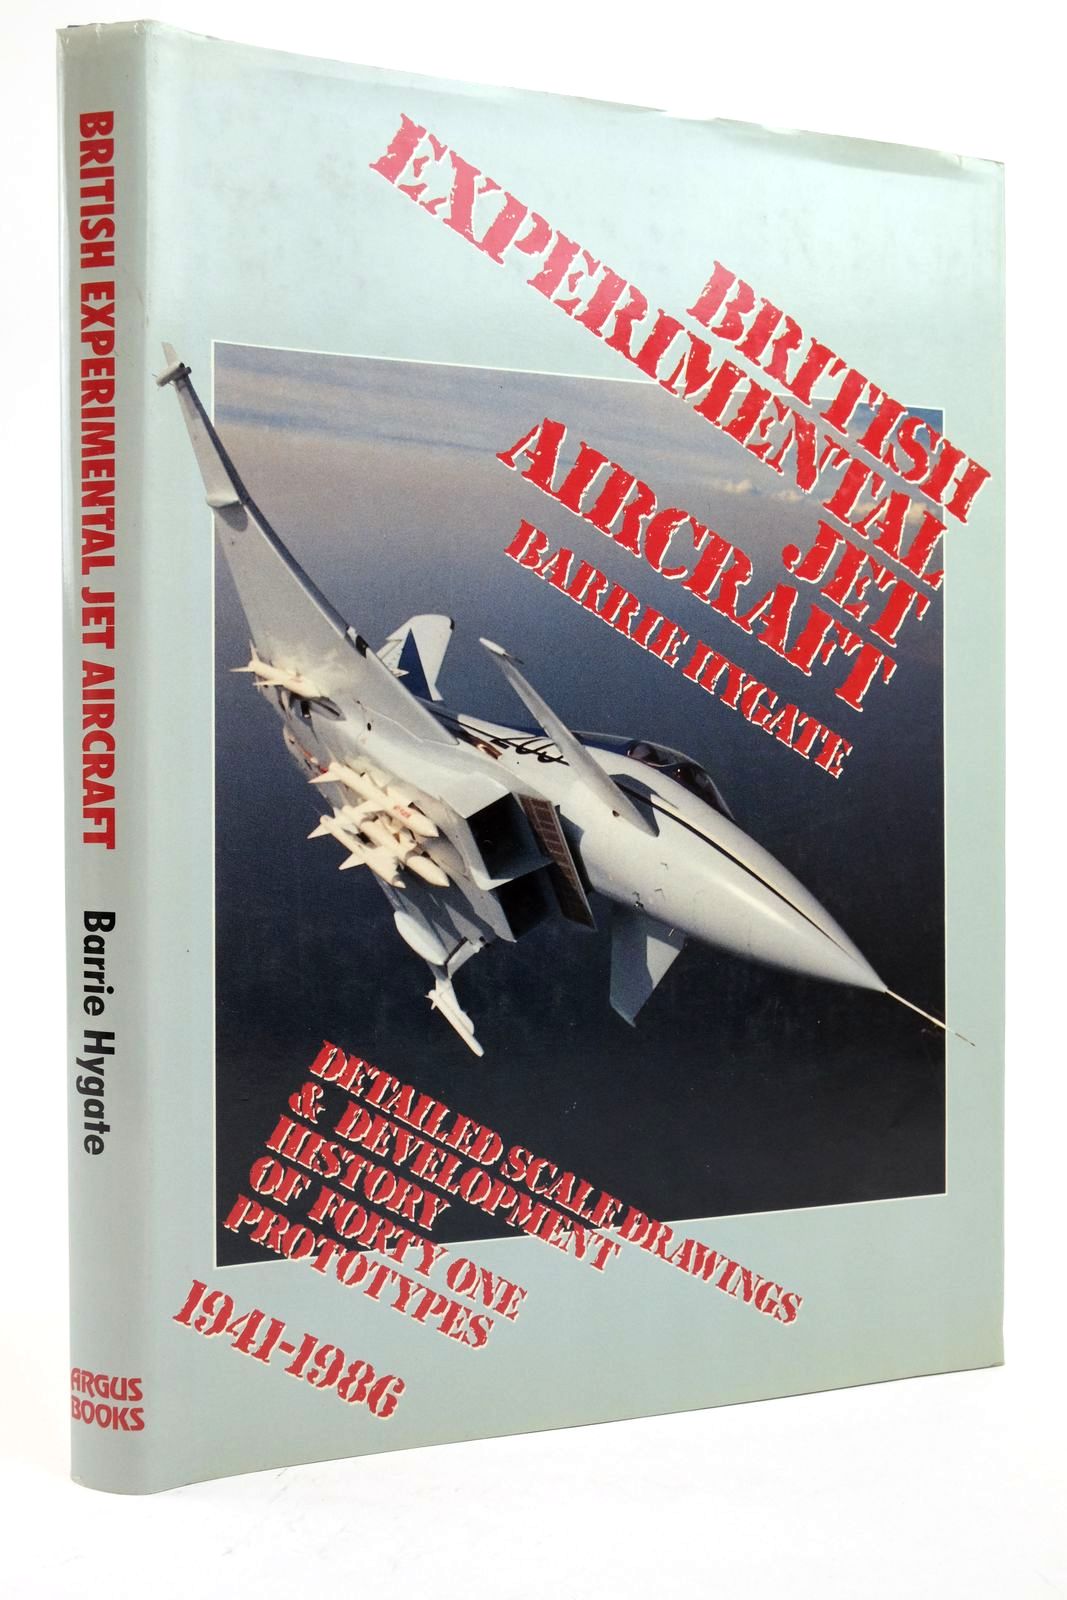 Photo of BRITISH EXPERIMENTAL JET AIRCRAFT written by Hygate, Barrie published by Argus Books (STOCK CODE: 2138500)  for sale by Stella & Rose's Books